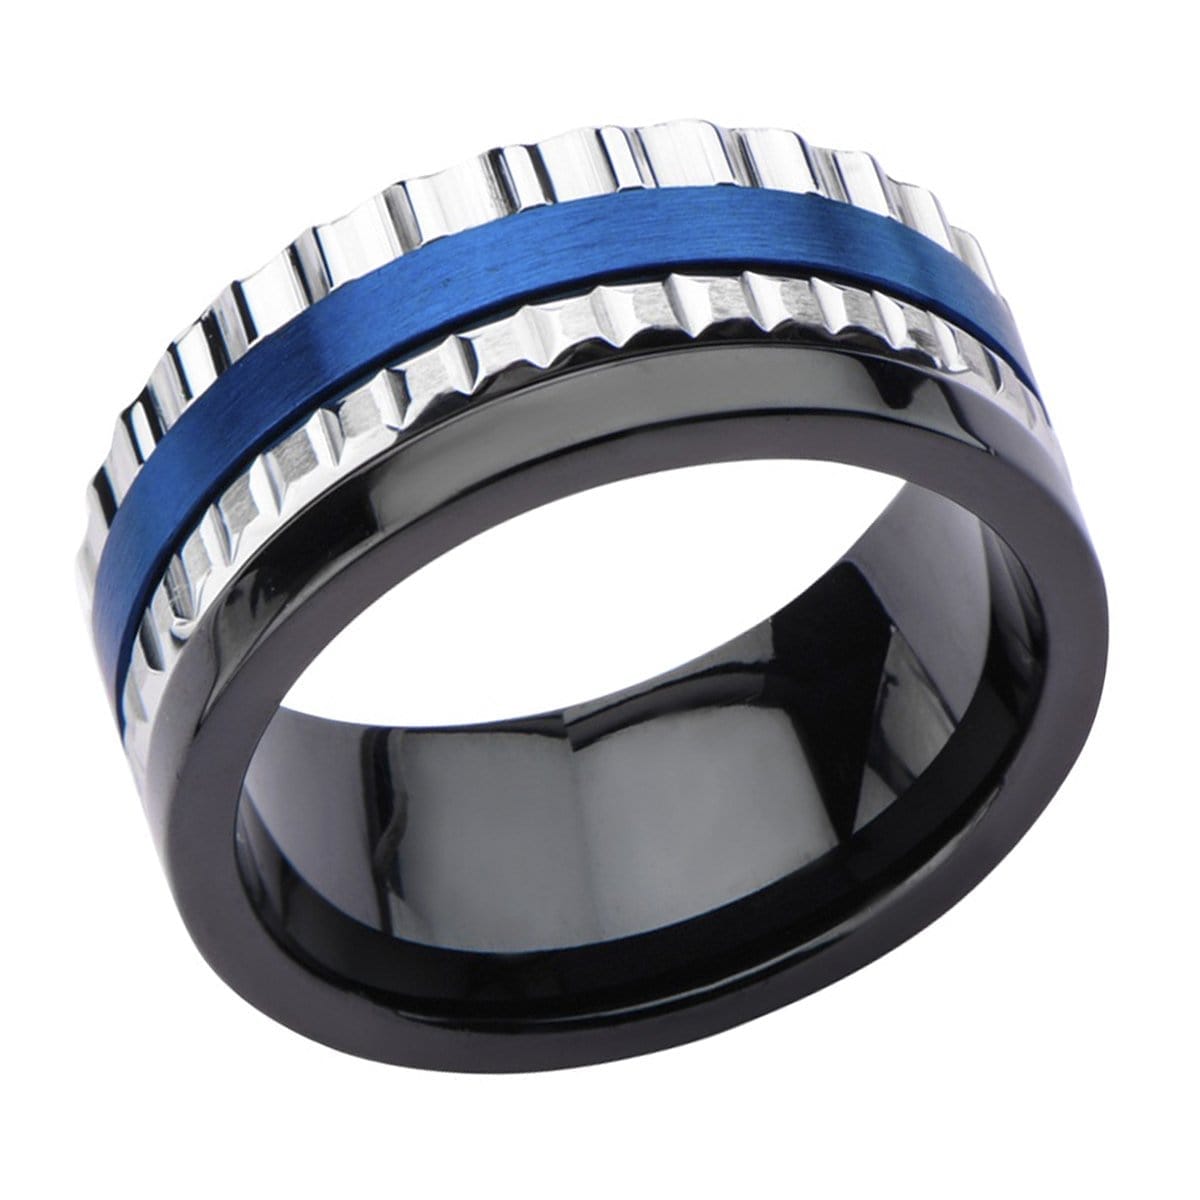 INOX JEWELRY Rings Blue, Black and Silver Tone Stainless Steel Jagged Edge Band Ring